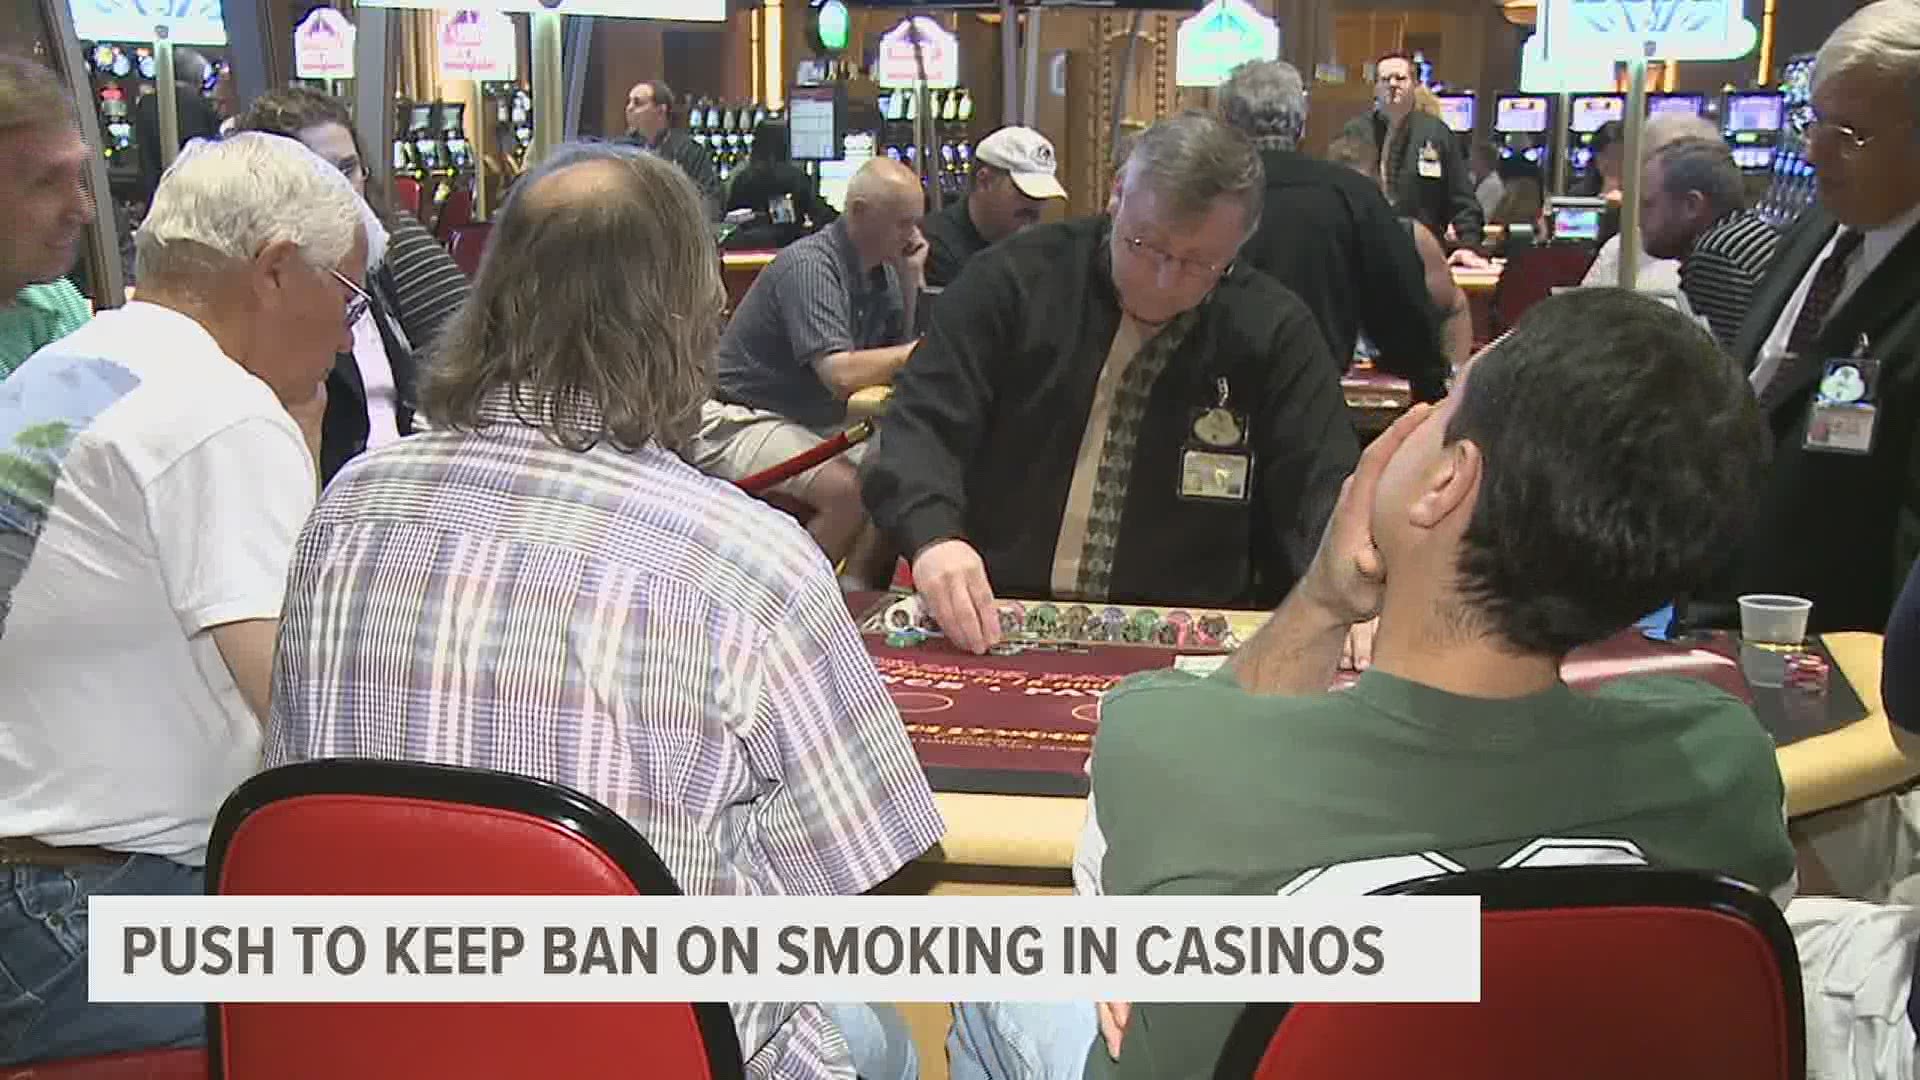 The Coalition Breathe Free Pennsylvania spoke with a Pennsylvania state lawmaker on the importance of a smoking ban in places like casinos and bars.